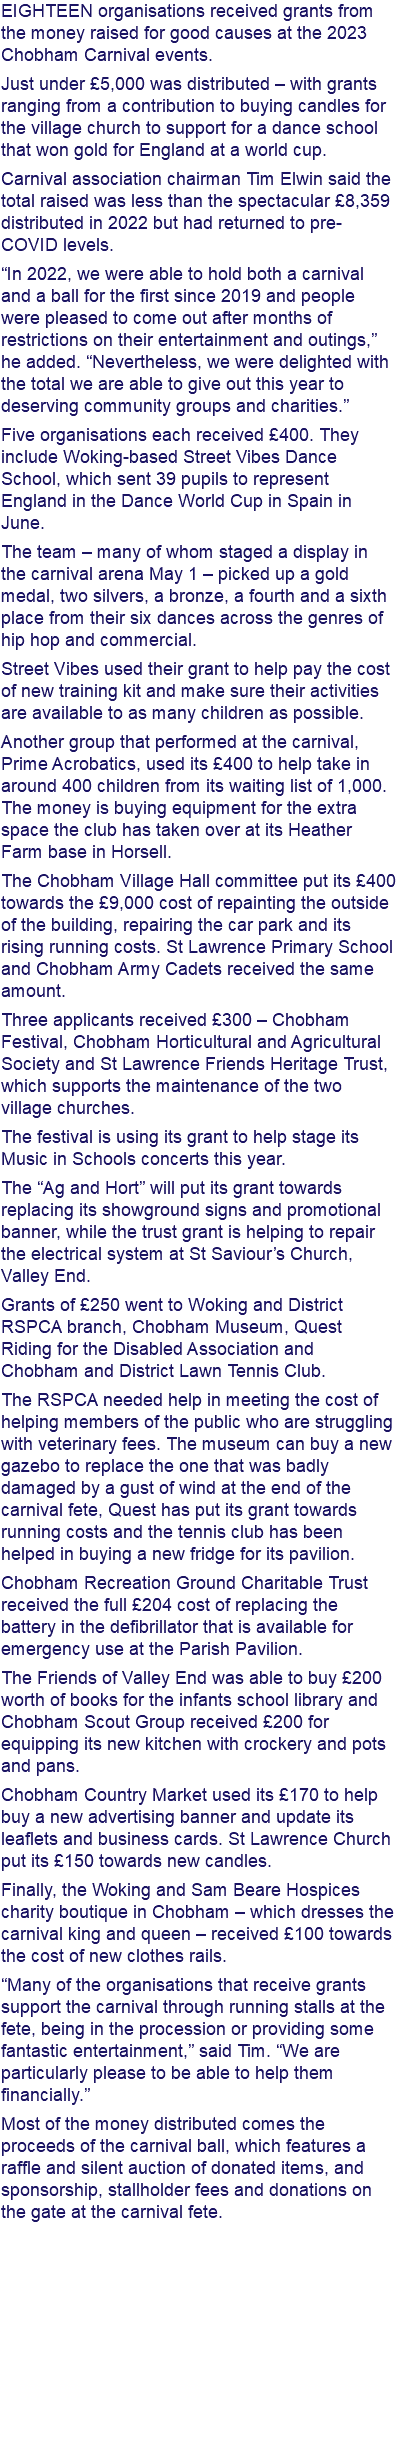 EIGHTEEN organisations received grants from the money raised for good causes at the 2023 Chobham Carnival events. Just under £5,000 was distributed – with grants ranging from a contribution to buying candles for the village church to support for a dance school that won gold for England at a world cup. Carnival association chairman Tim Elwin said the total raised was less than the spectacular £8,359 distributed in 2022 but had returned to pre-COVID levels. “In 2022, we were able to hold both a carnival and a ball for the first since 2019 and people were pleased to come out after months of restrictions on their entertainment and outings,” he added. “Nevertheless, we were delighted with the total we are able to give out this year to deserving community groups and charities.” Five organisations each received £400. They include Woking-based Street Vibes Dance School, which sent 39 pupils to represent England in the Dance World Cup in Spain in June. The team – many of whom staged a display in the carnival arena May 1 – picked up a gold medal, two silvers, a bronze, a fourth and a sixth place from their six dances across the genres of hip hop and commercial. Street Vibes used their grant to help pay the cost of new training kit and make sure their activities are available to as many children as possible. Another group that performed at the carnival, Prime Acrobatics, used its £400 to help take in around 400 children from its waiting list of 1,000. The money is buying equipment for the extra space the club has taken over at its Heather Farm base in Horsell. The Chobham Village Hall committee put its £400 towards the £9,000 cost of repainting the outside of the building, repairing the car park and its rising running costs. St Lawrence Primary School and Chobham Army Cadets received the same amount. Three applicants received £300 – Chobham Festival, Chobham Horticultural and Agricultural Society and St Lawrence Friends Heritage Trust, which supports the maintenance of the two village churches. The festival is using its grant to help stage its Music in Schools concerts this year. The “Ag and Hort” will put its grant towards replacing its showground signs and promotional banner, while the trust grant is helping to repair the electrical system at St Saviour’s Church, Valley End. Grants of £250 went to Woking and District RSPCA branch, Chobham Museum, Quest Riding for the Disabled Association and Chobham and District Lawn Tennis Club. The RSPCA needed help in meeting the cost of helping members of the public who are struggling with veterinary fees. The museum can buy a new gazebo to replace the one that was badly damaged by a gust of wind at the end of the carnival fete, Quest has put its grant towards running costs and the tennis club has been helped in buying a new fridge for its pavilion. Chobham Recreation Ground Charitable Trust received the full £204 cost of replacing the battery in the defibrillator that is available for emergency use at the Parish Pavilion. The Friends of Valley End was able to buy £200 worth of books for the infants school library and Chobham Scout Group received £200 for equipping its new kitchen with crockery and pots and pans. Chobham Country Market used its £170 to help buy a new advertising banner and update its leaflets and business cards. St Lawrence Church put its £150 towards new candles. Finally, the Woking and Sam Beare Hospices charity boutique in Chobham – which dresses the carnival king and queen – received £100 towards the cost of new clothes rails. “Many of the organisations that receive grants support the carnival through running stalls at the fete, being in the procession or providing some fantastic entertainment,” said Tim. “We are particularly please to be able to help them financially.” Most of the money distributed comes the proceeds of the carnival ball, which features a raffle and silent auction of donated items, and sponsorship, stallholder fees and donations on the gate at the carnival fete. 